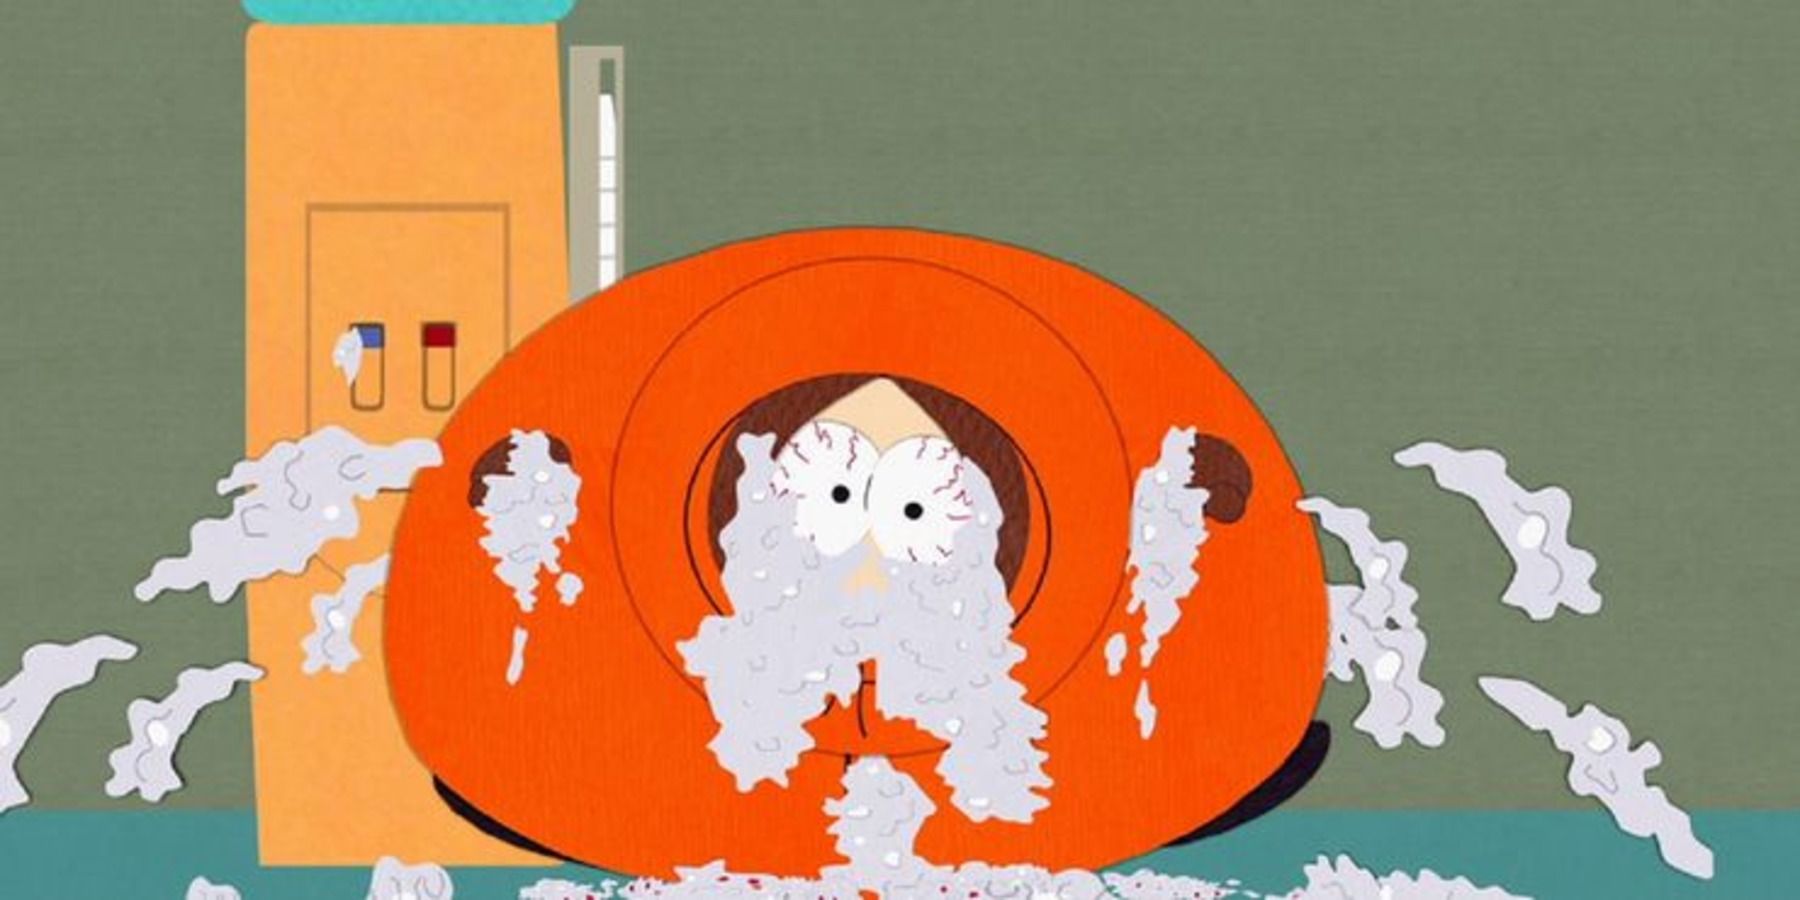 South-Park-Kenny-dies-from-antacids